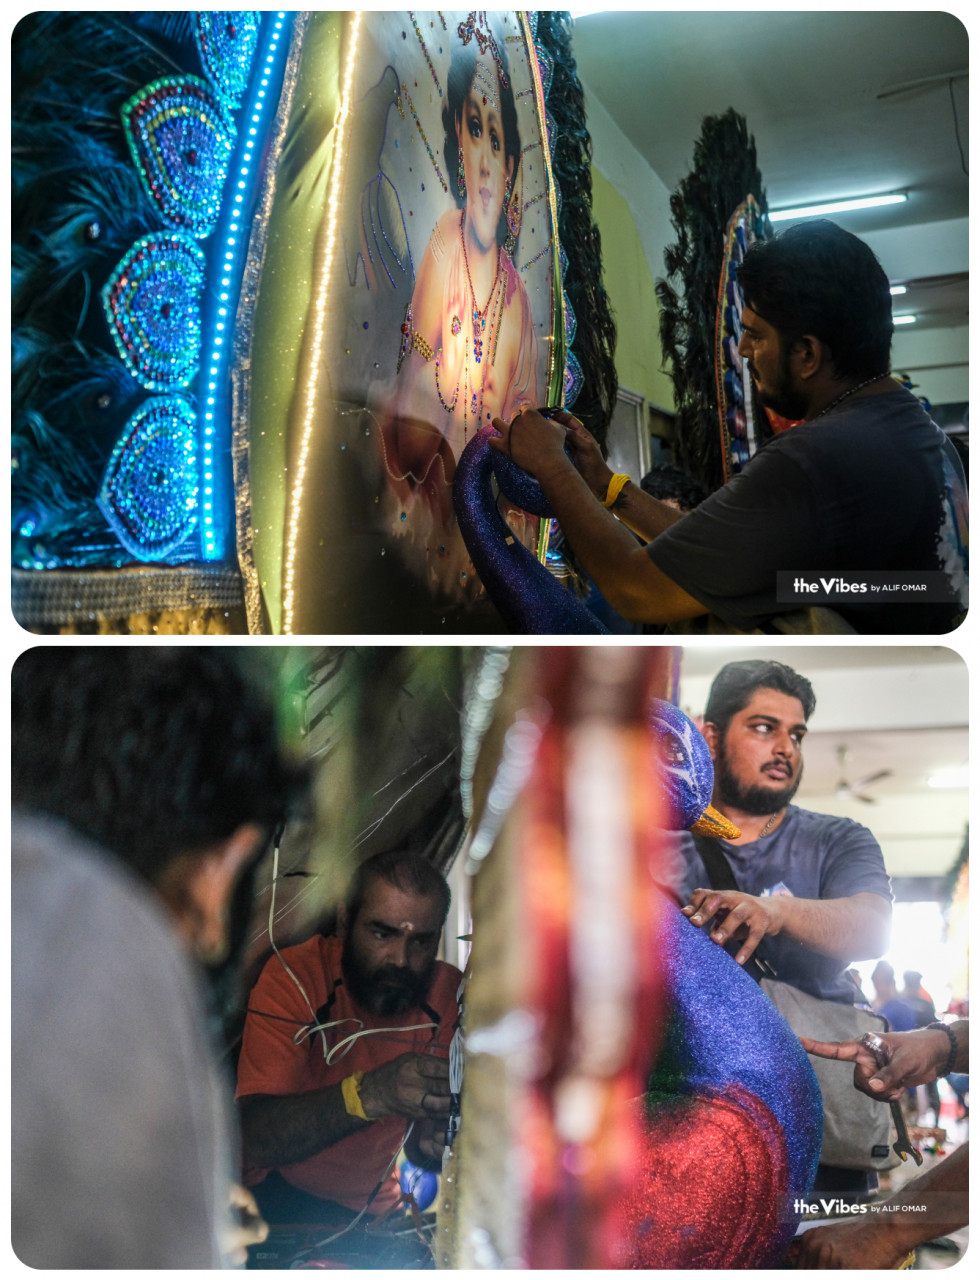 Suresh Singh Rashpal Singh is seen making adjustments to his Poo Kadavi, with the assistance of devotees from Jega and Suresh Poo Kavadi Group. – Alif Omar/The Vibes pic